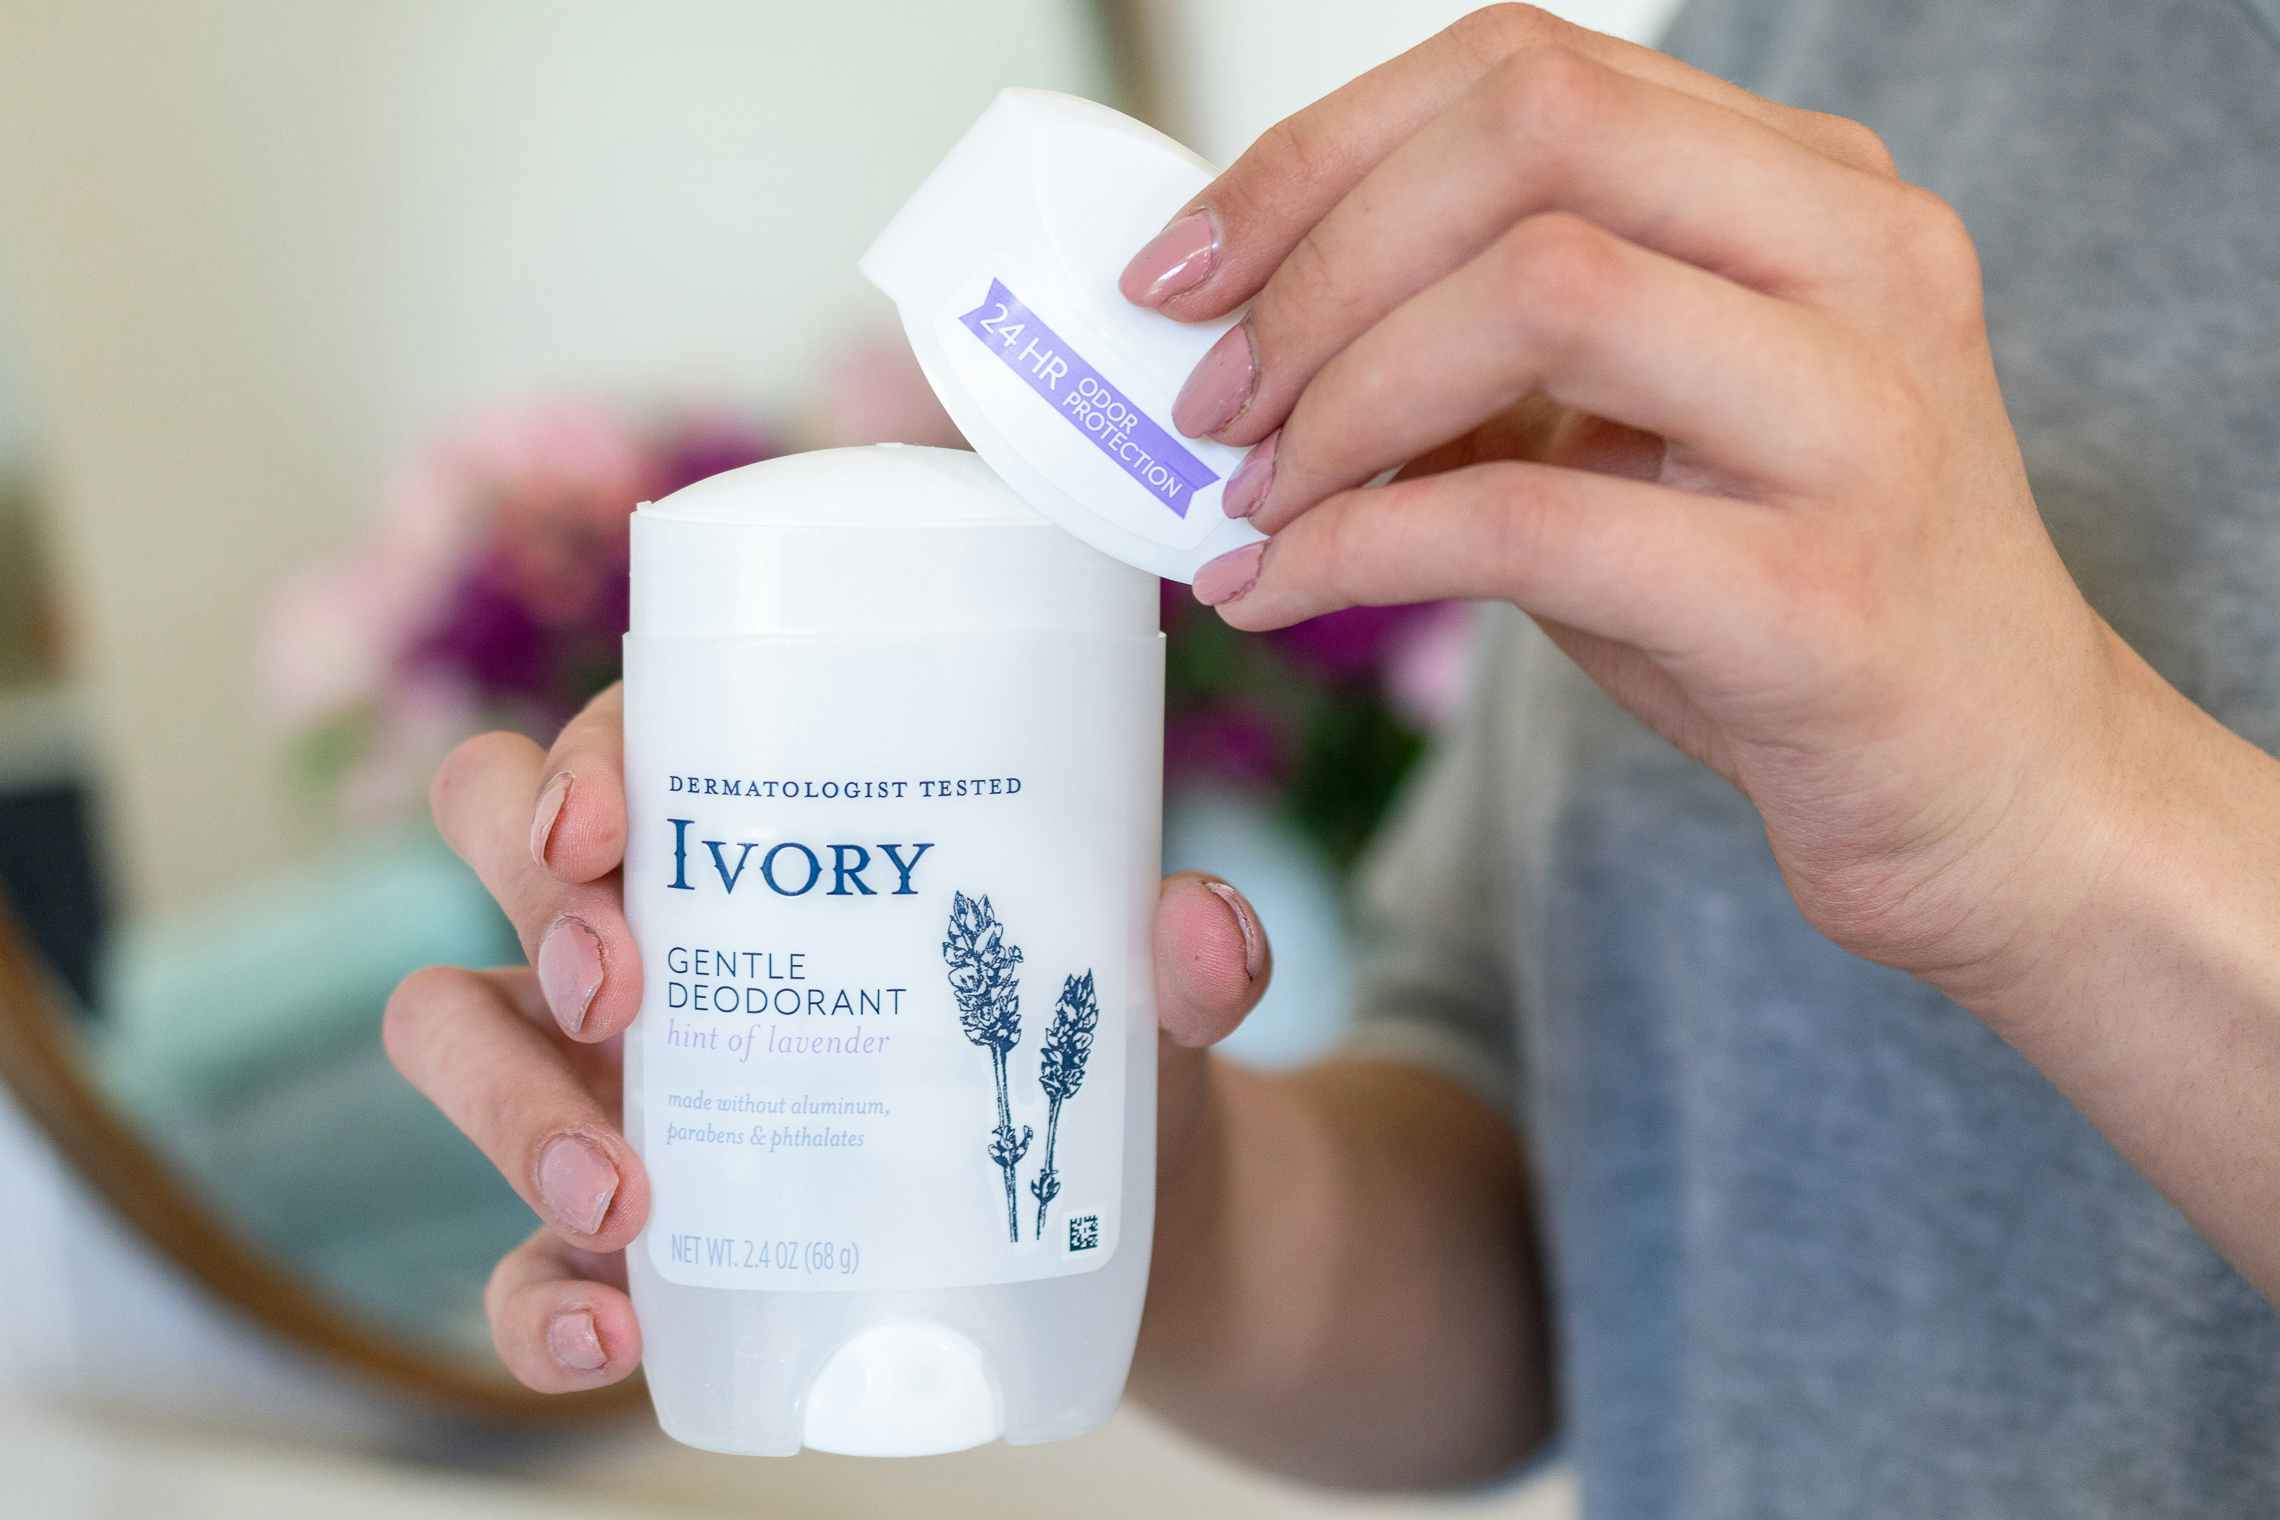 A woman taking the cap off Ivory deodorant.